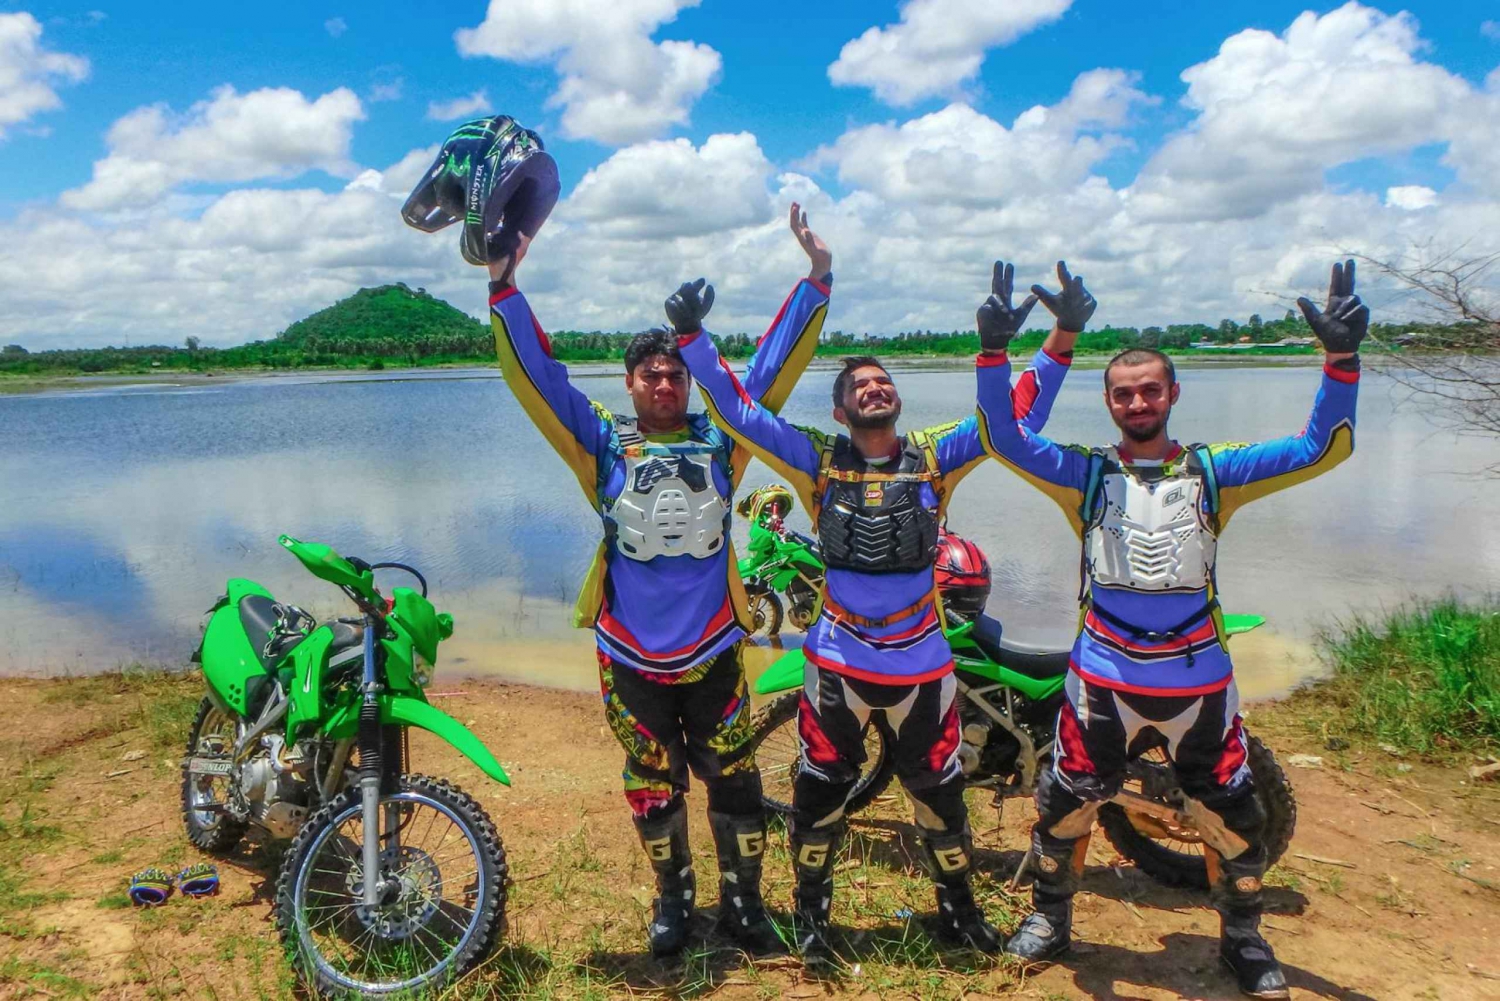 Pattaya: Half-Day Guided Enduro Tour with Meal